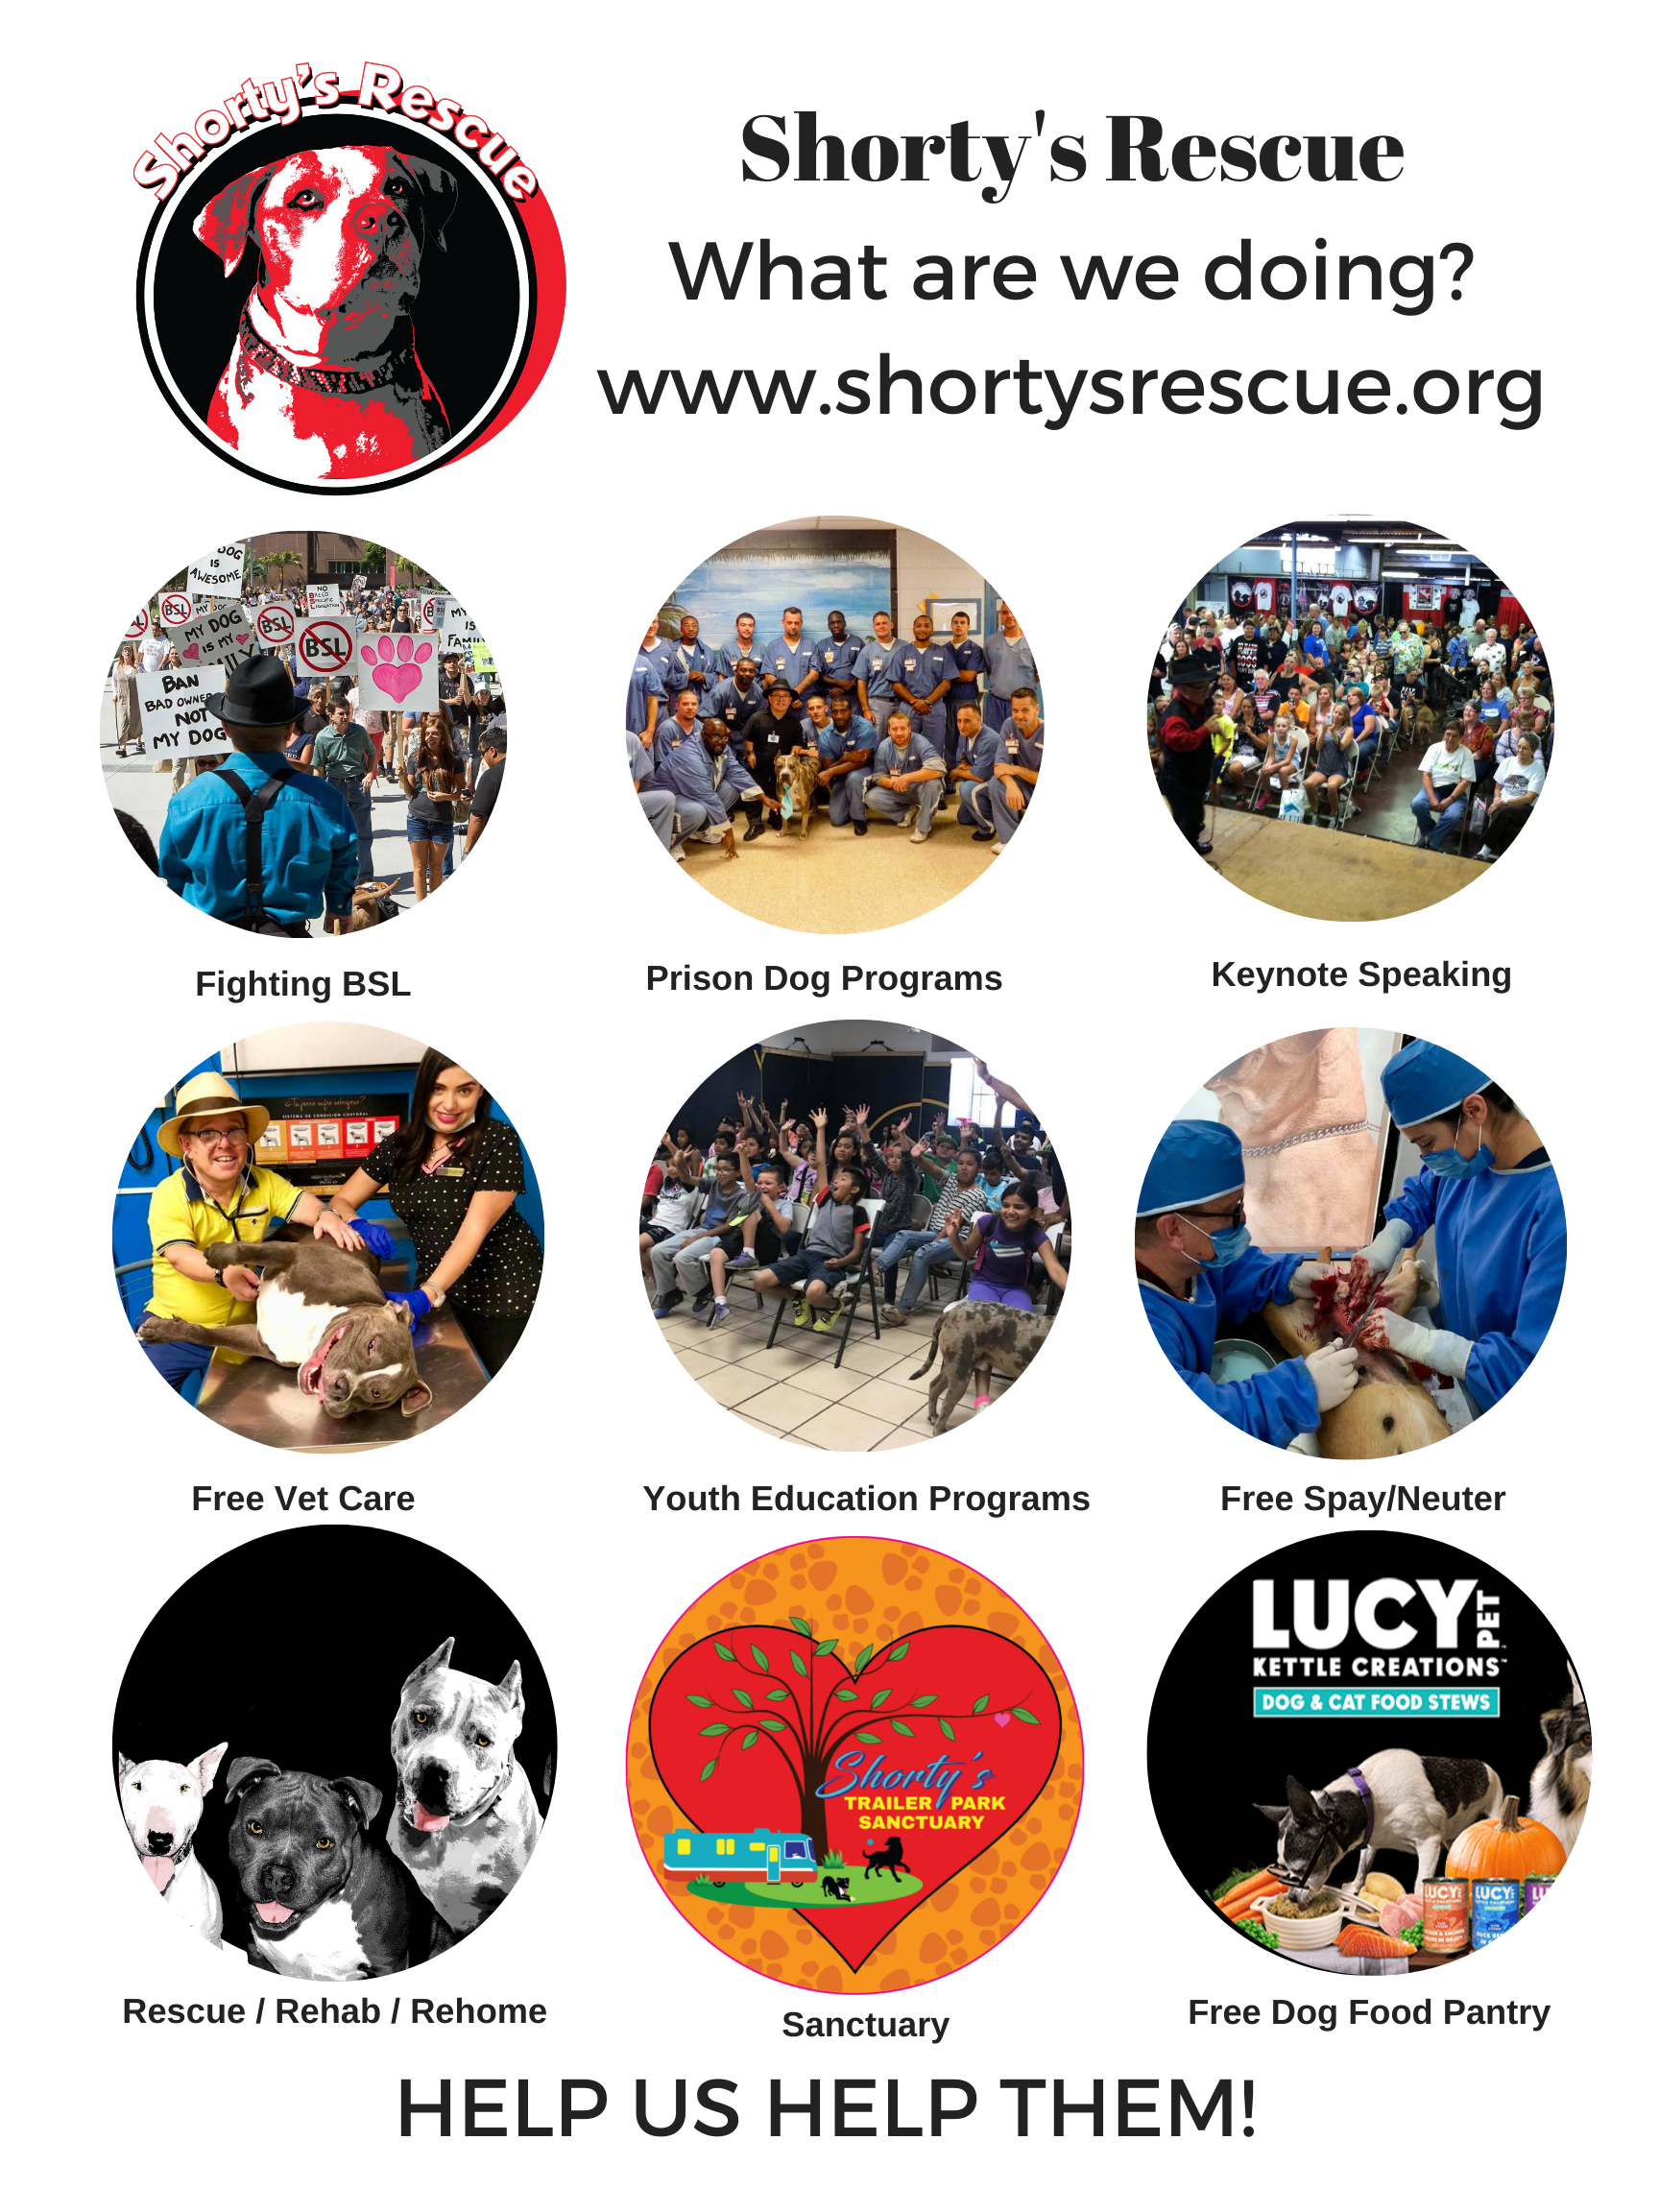 Shorty's Rescue - What we're doing for the dogs